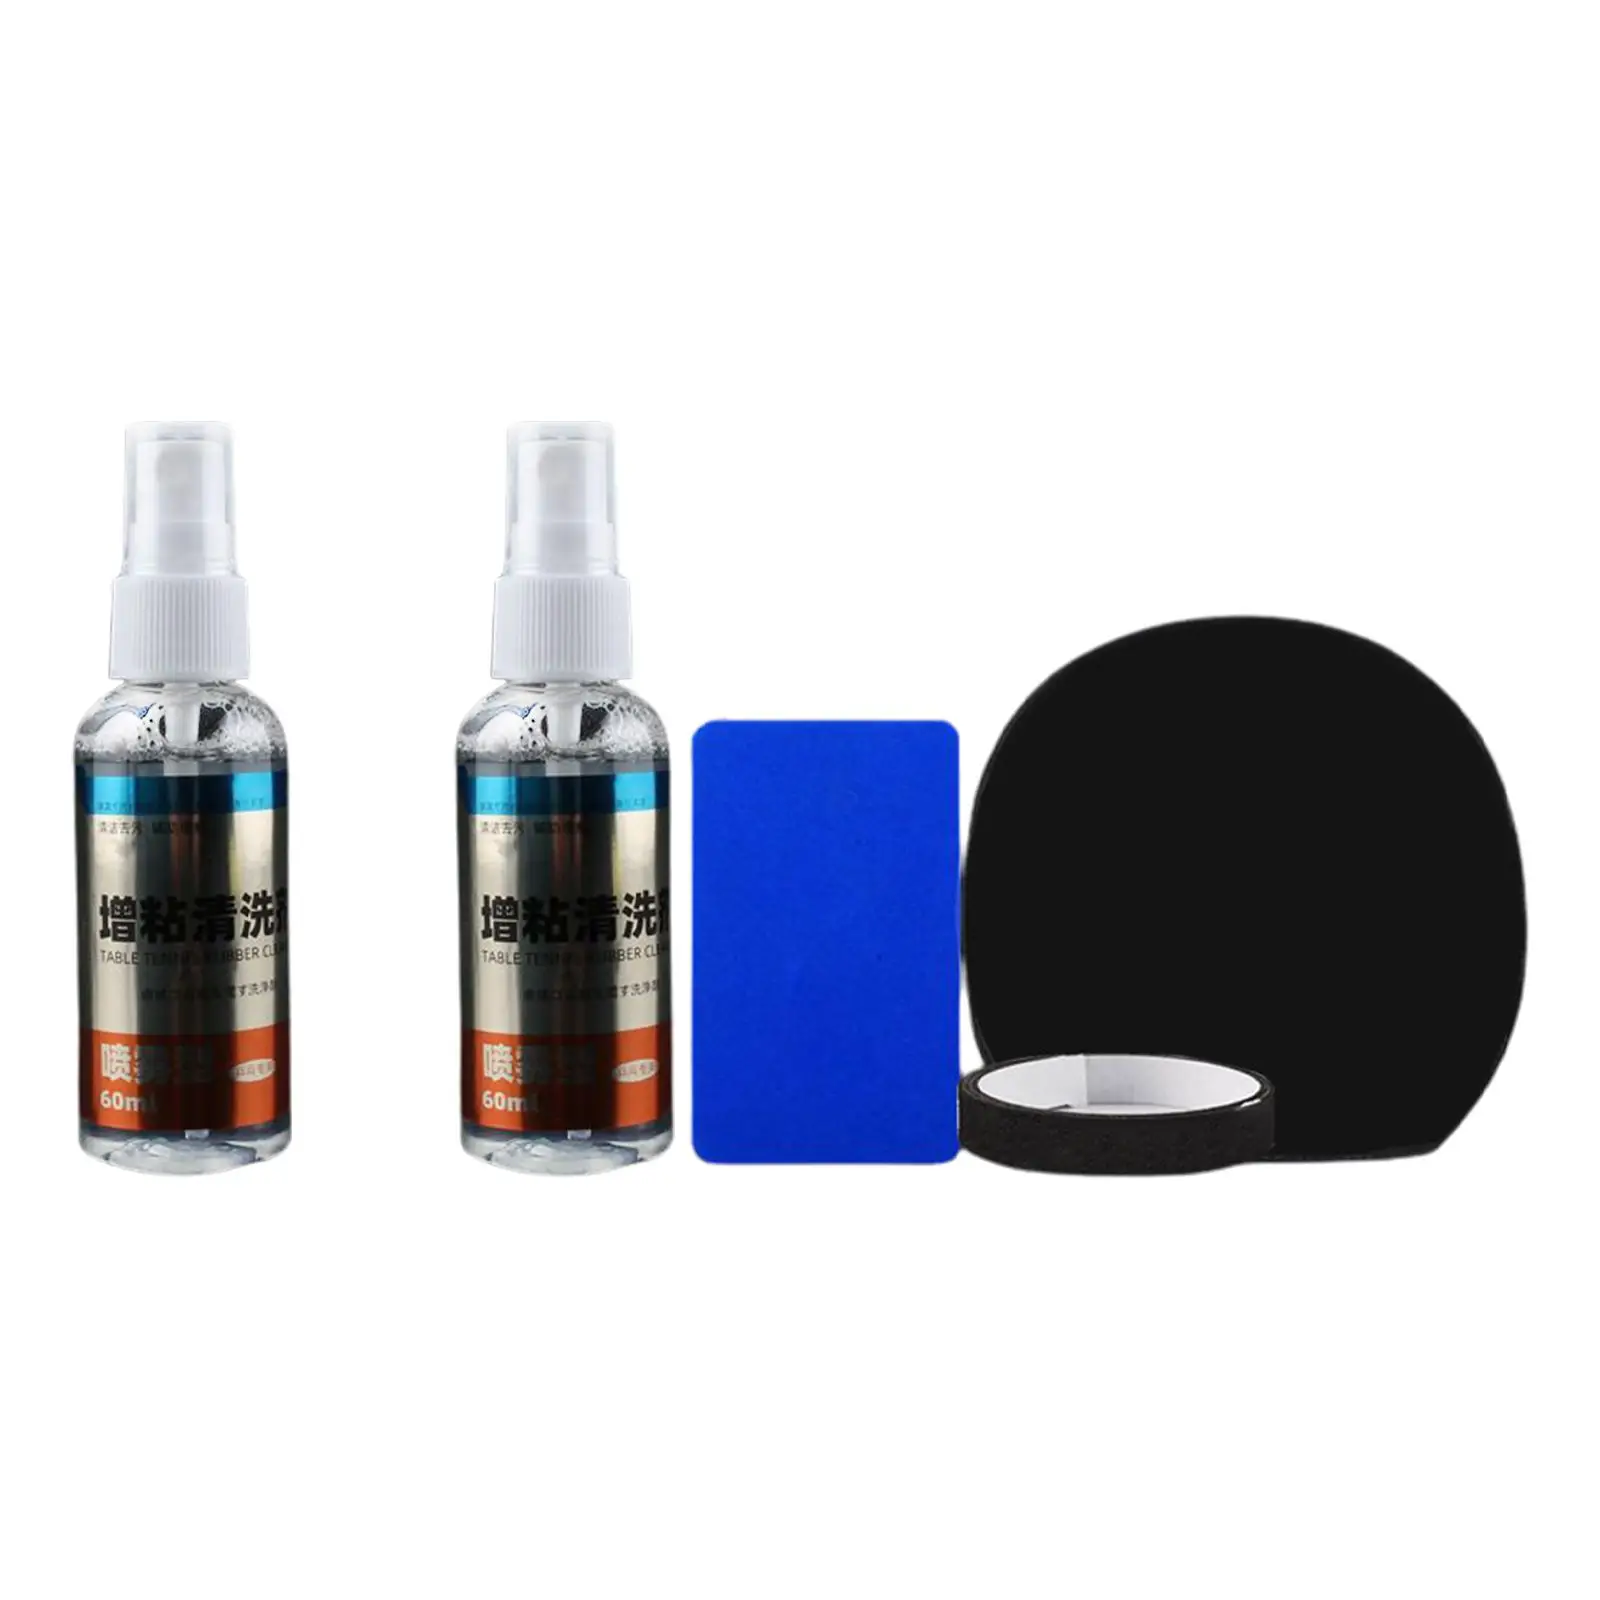 60ml Bats Equipment Cleaner Set Cleaning Agent Table Tennis Rubber Cleaner